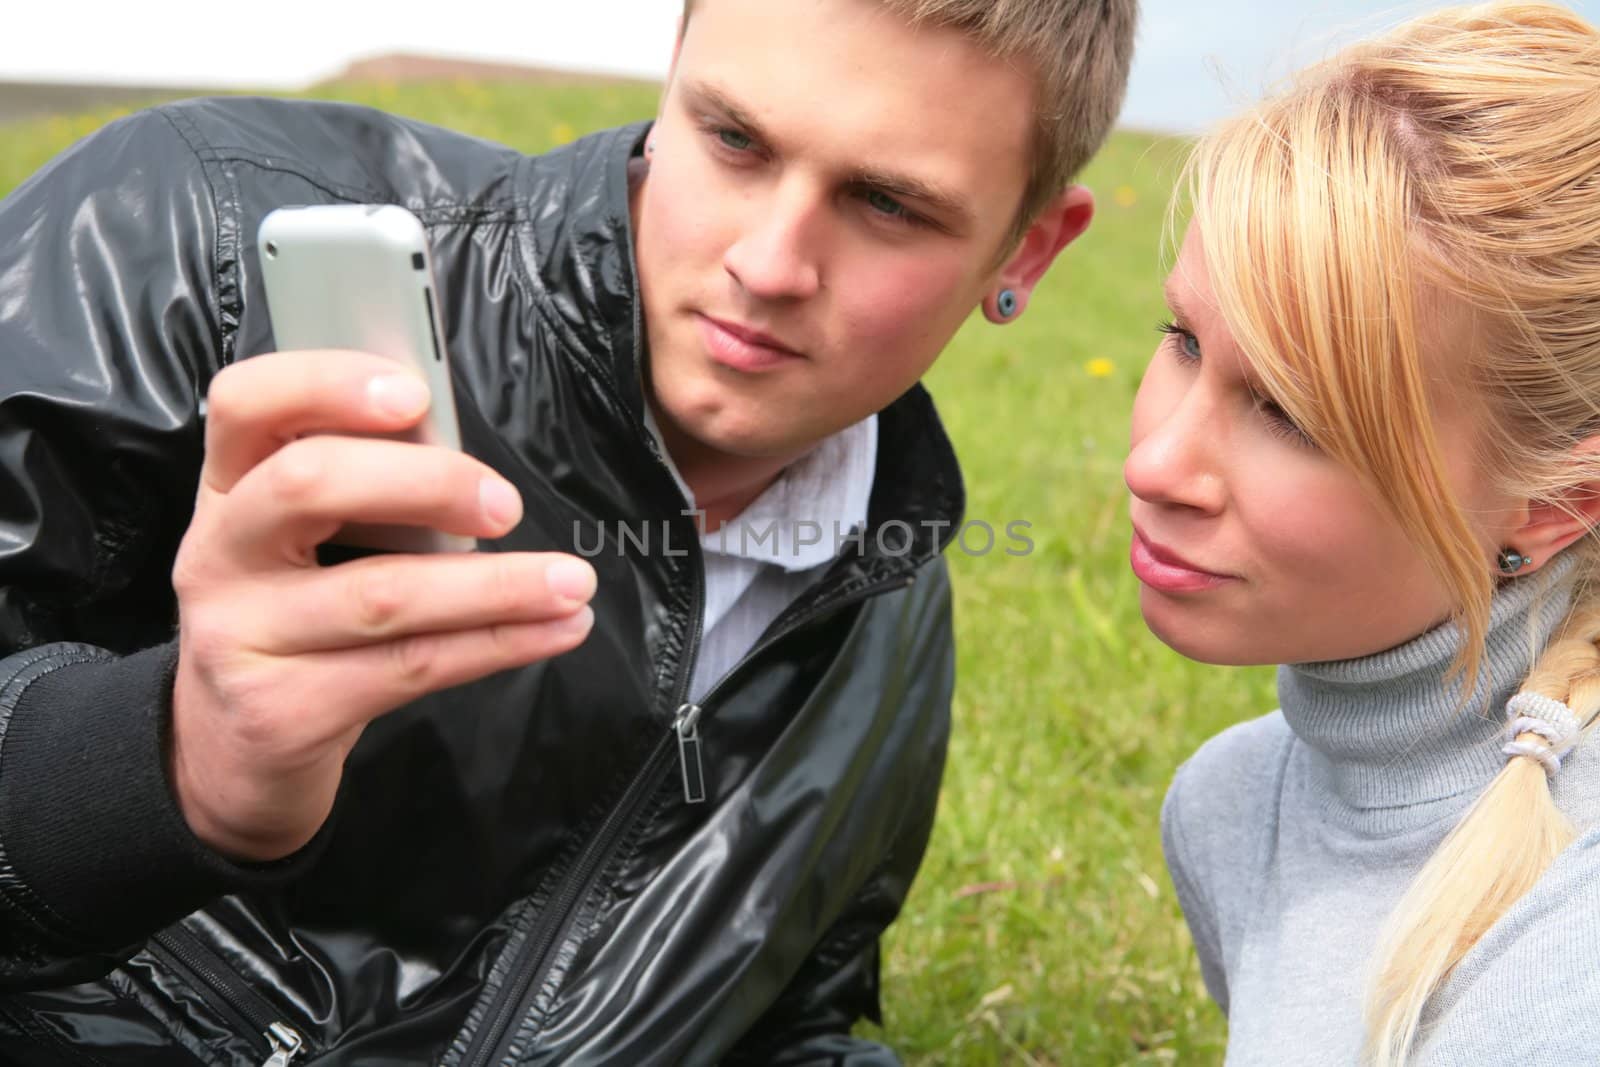 gay in black jacket and blond girl look at device